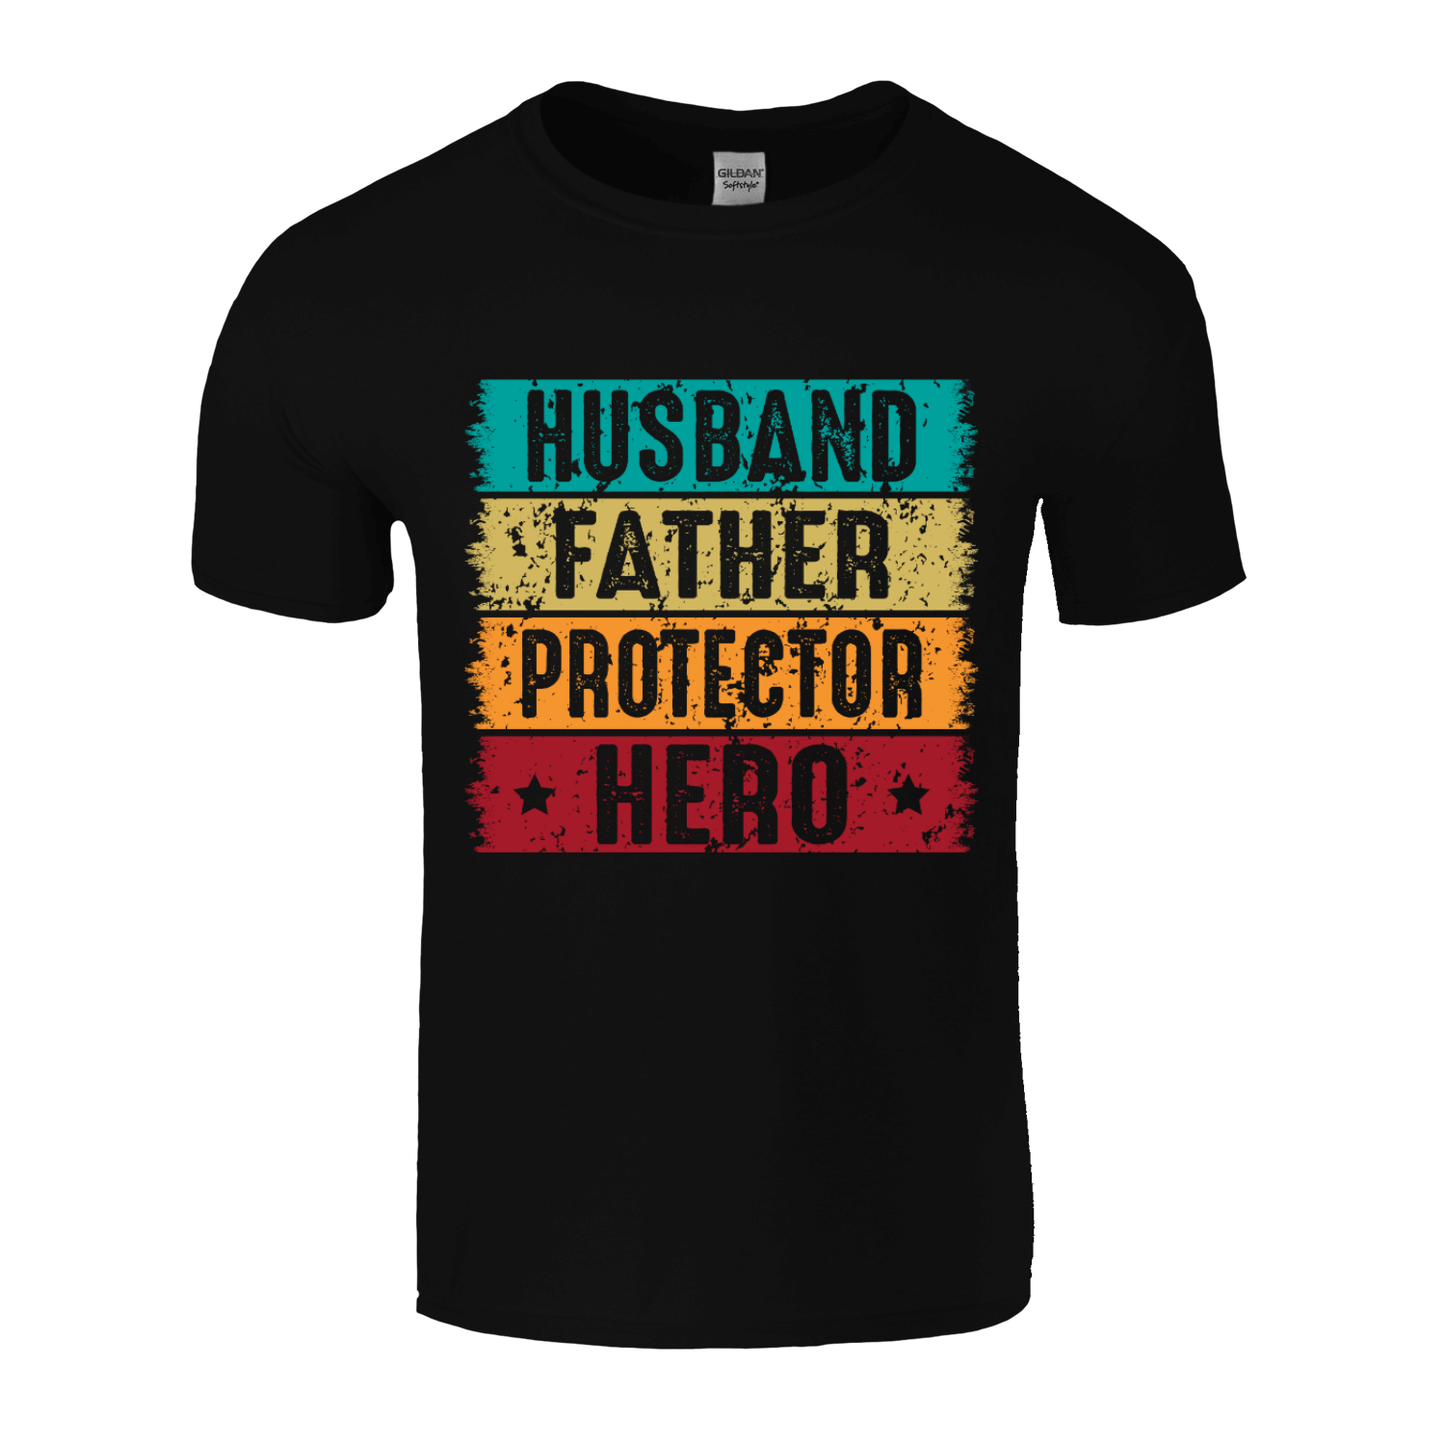 Vintage Father's Day T-shirt - Husband, Father, Protector, Hero